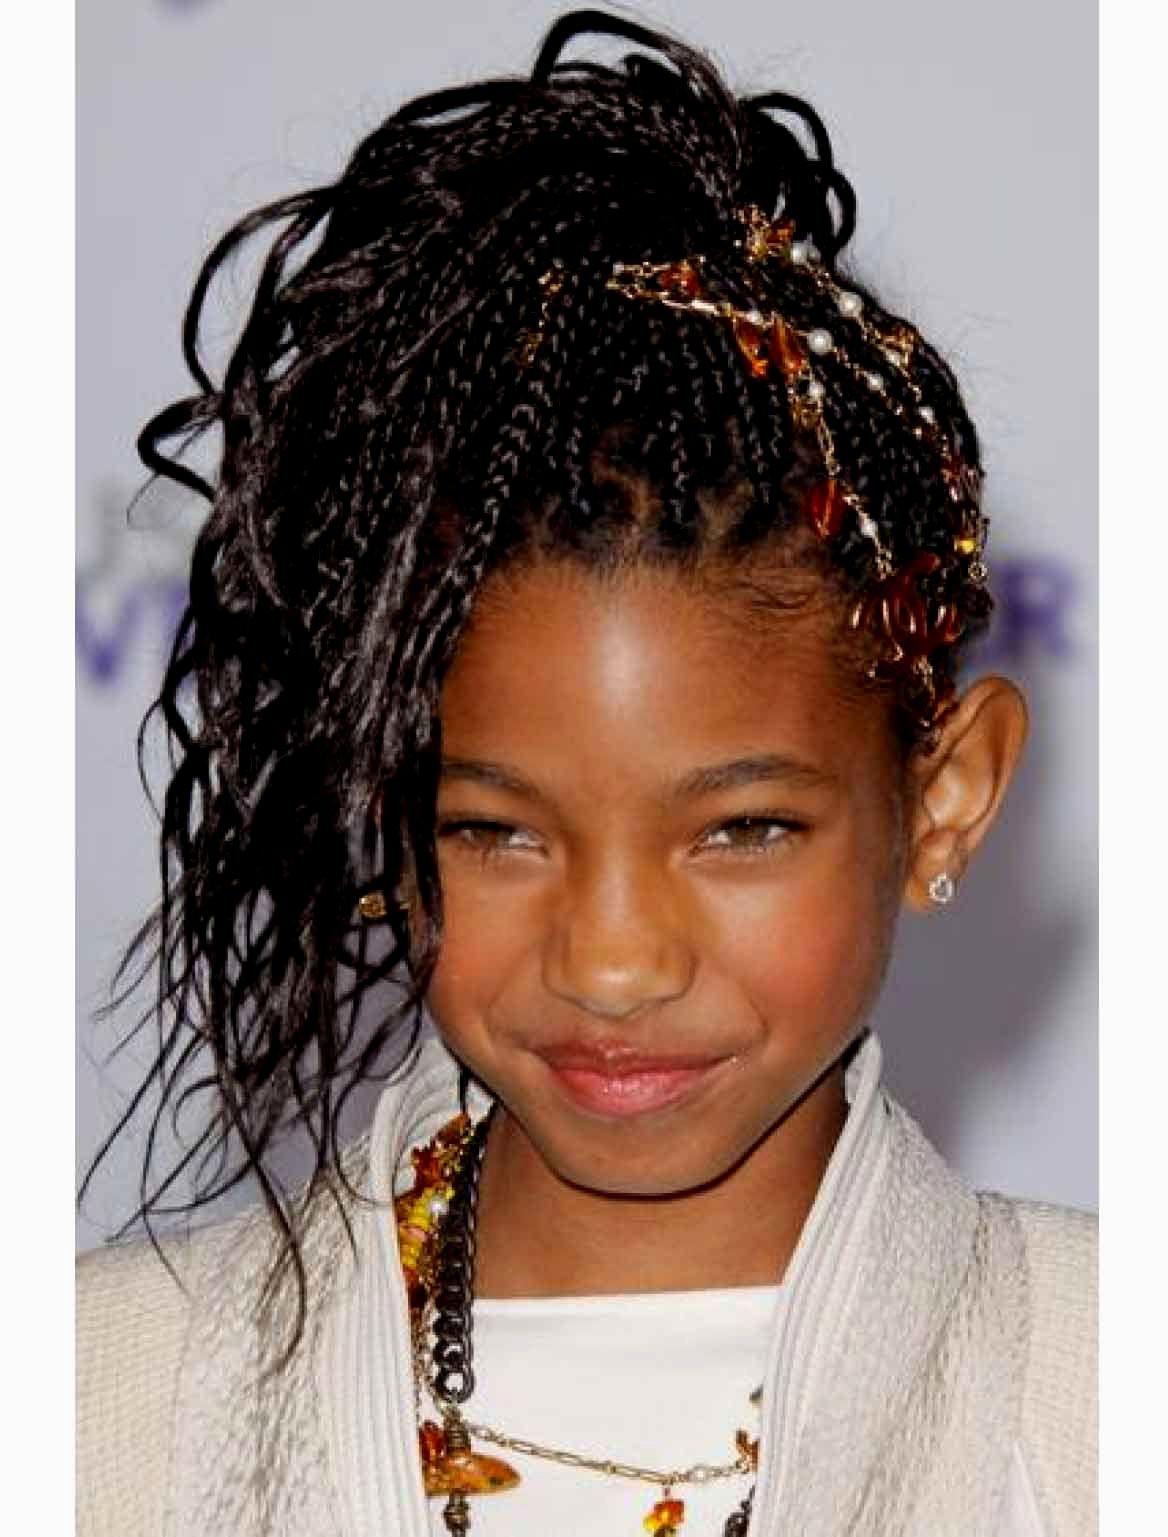 Little Black Girl Hairstyles
 64 Cool Braided Hairstyles for Little Black Girls – HAIRSTYLES